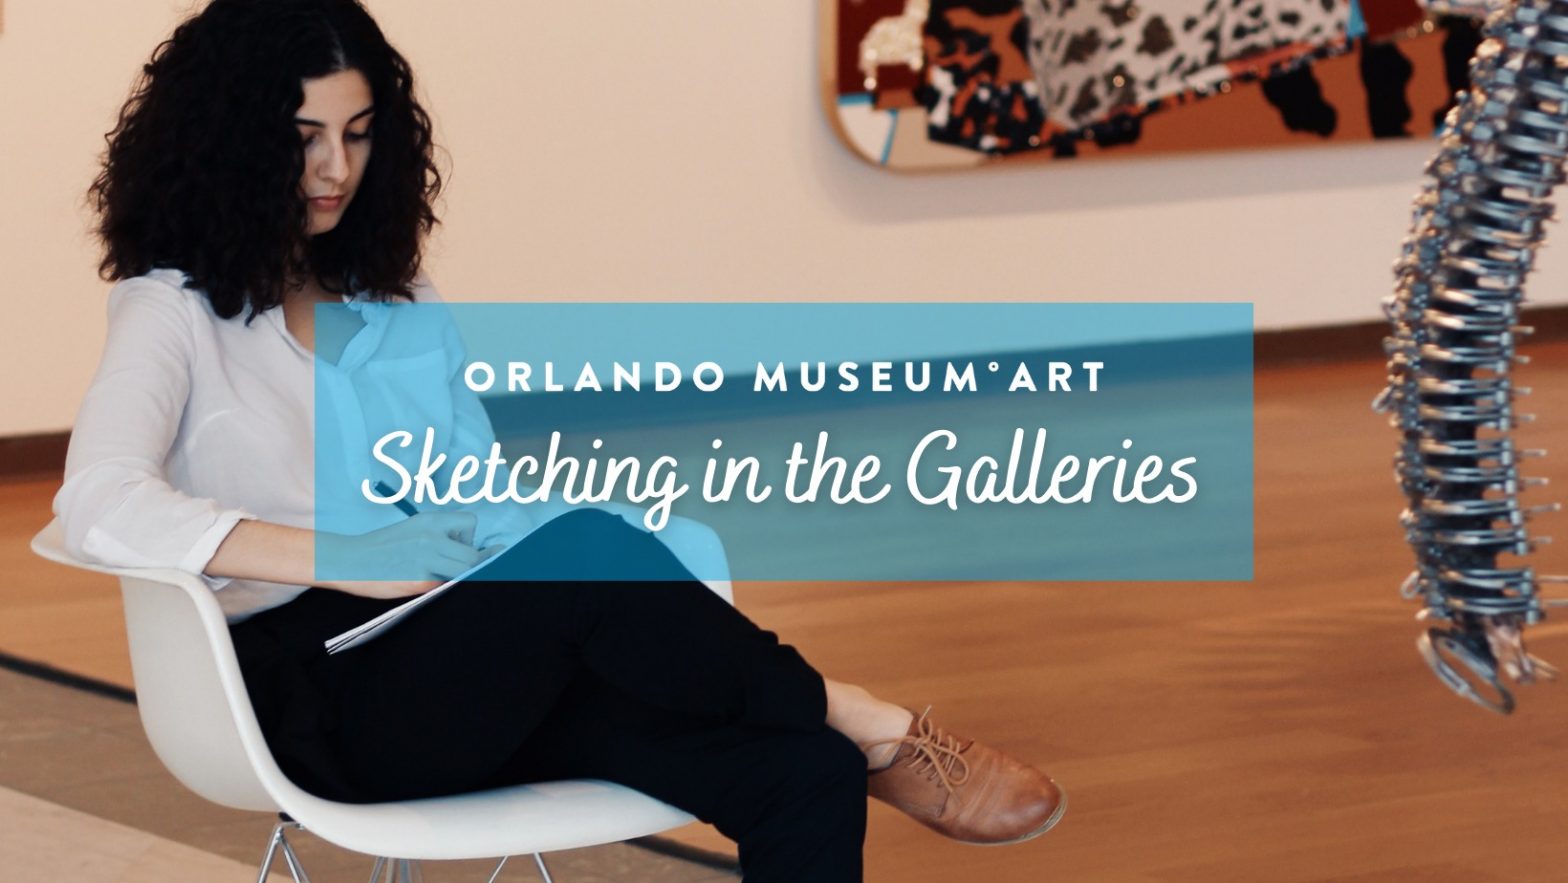 Sketching in the Galleries at OM°A